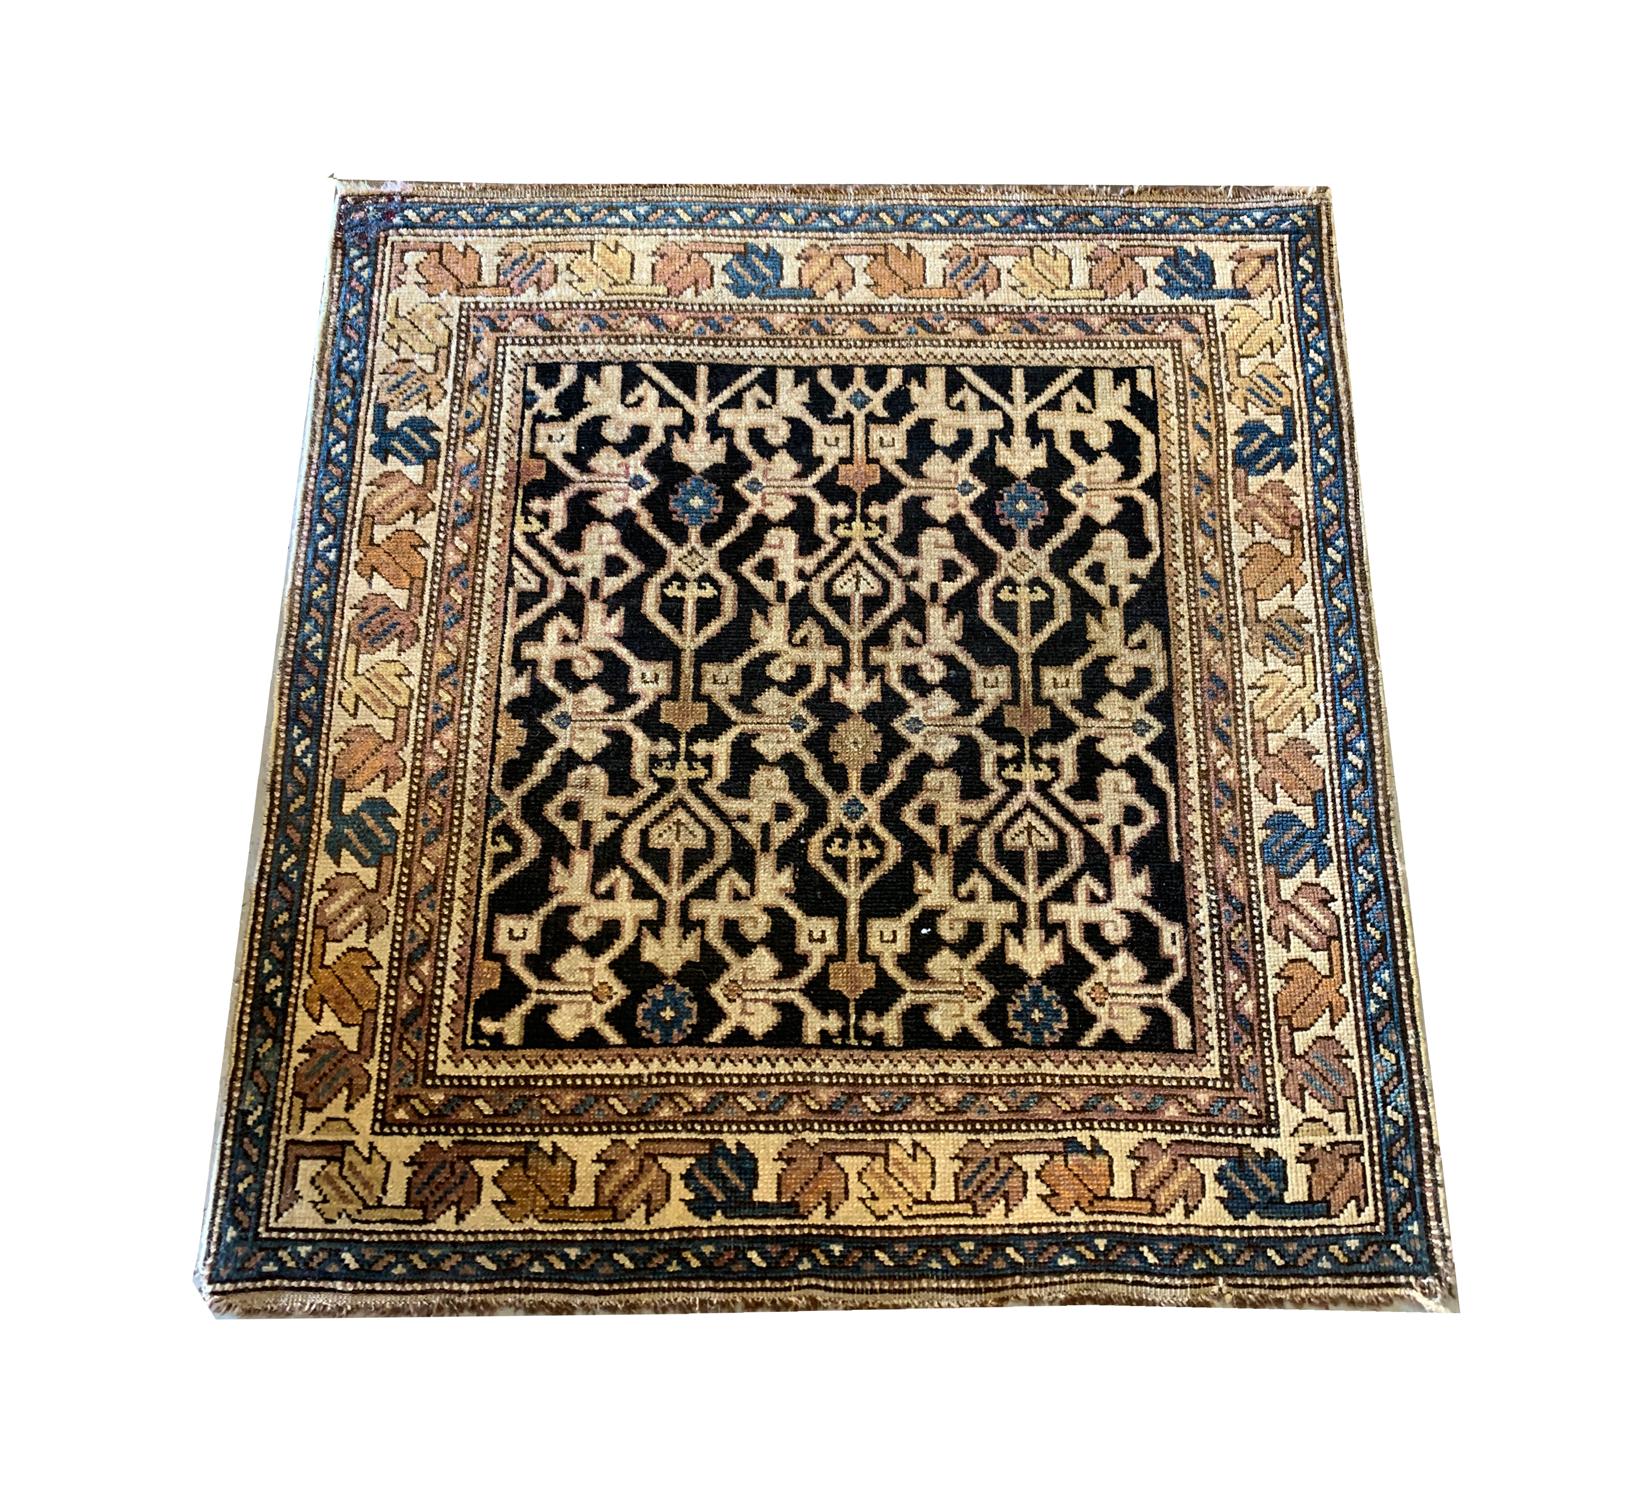 This small square rug was woven by hand in Kuba. The design is sophisticated, woven with a bold black background with contrasting accents of cream, beige, blue and brown that make up the symmetrical all-over pattern. This has then been framed by a